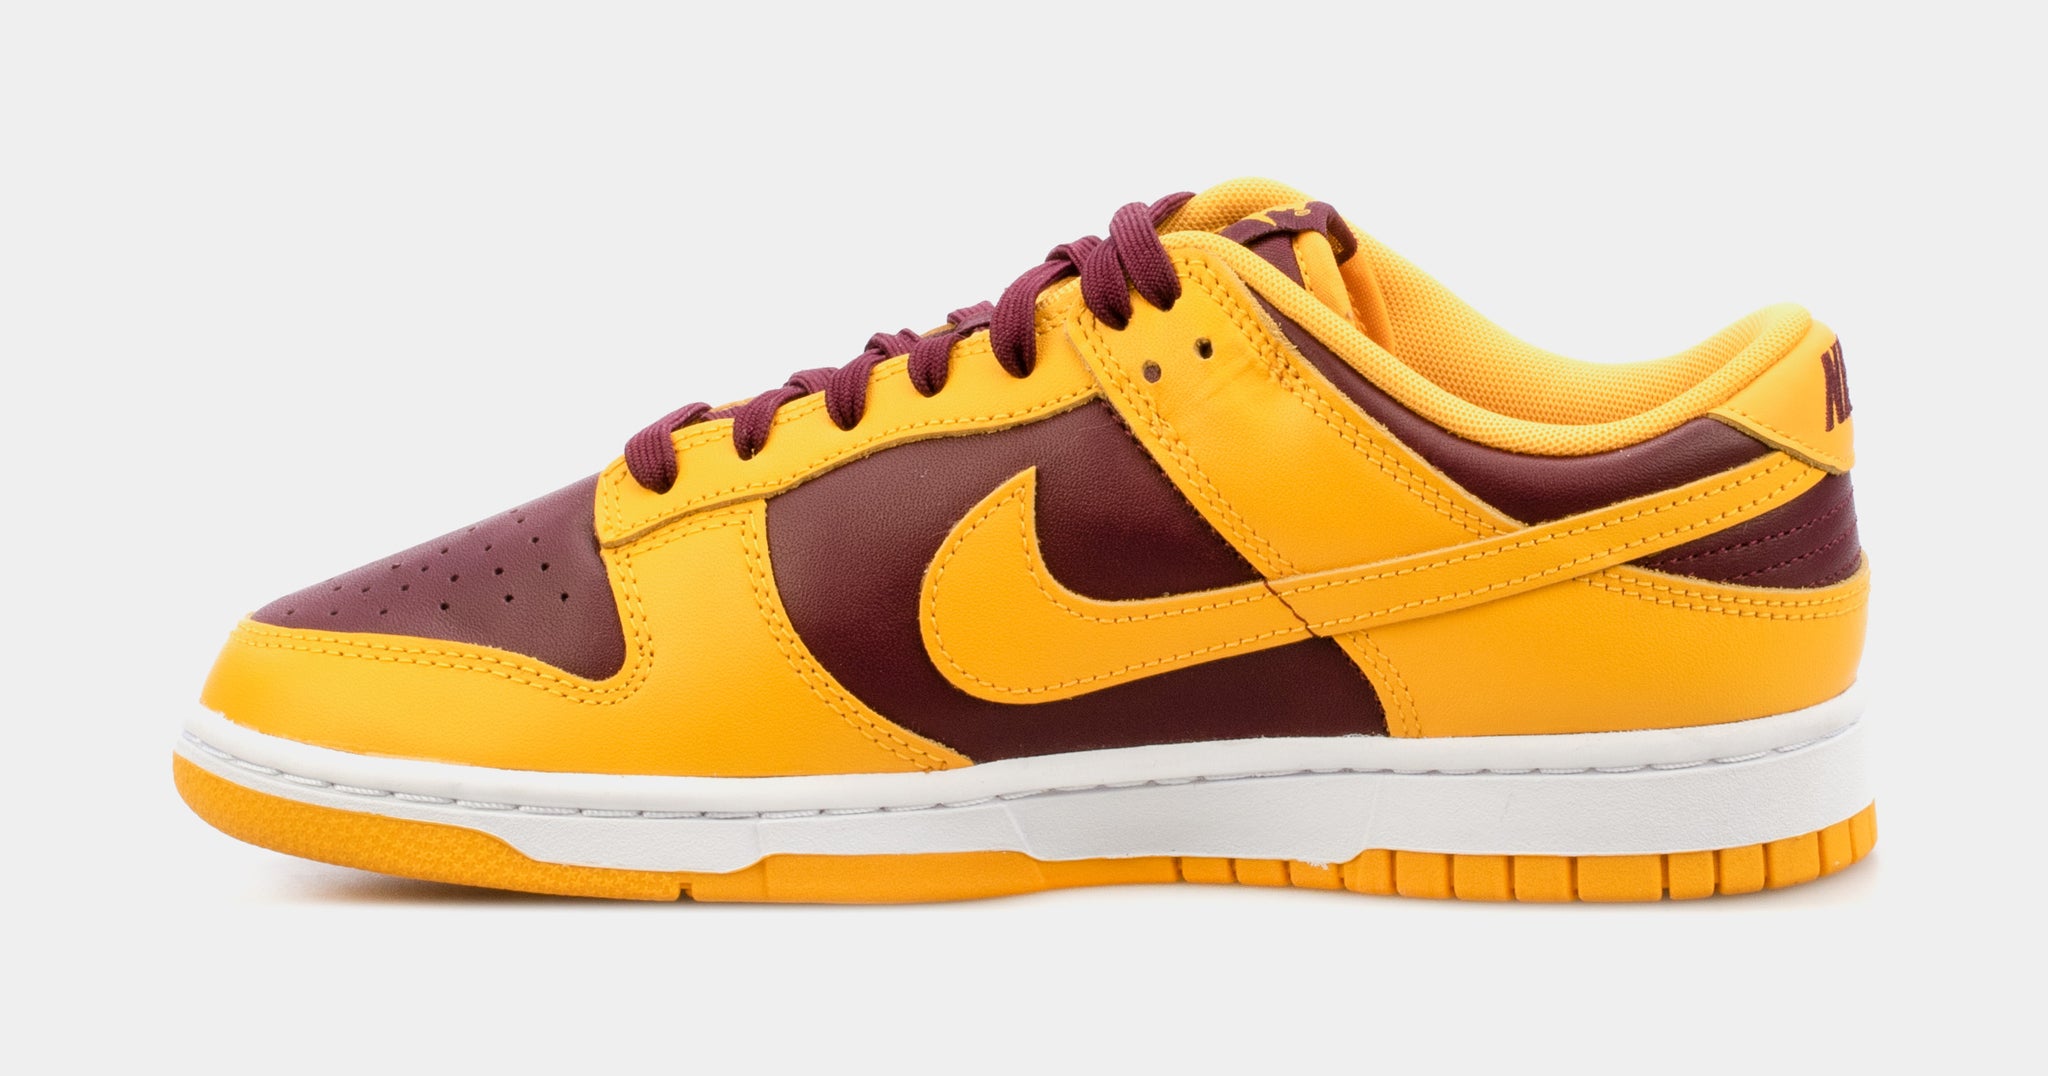 Nike Dunk Low Yellow Bordeaux Mens Lifestyle Shoes Red Yellow